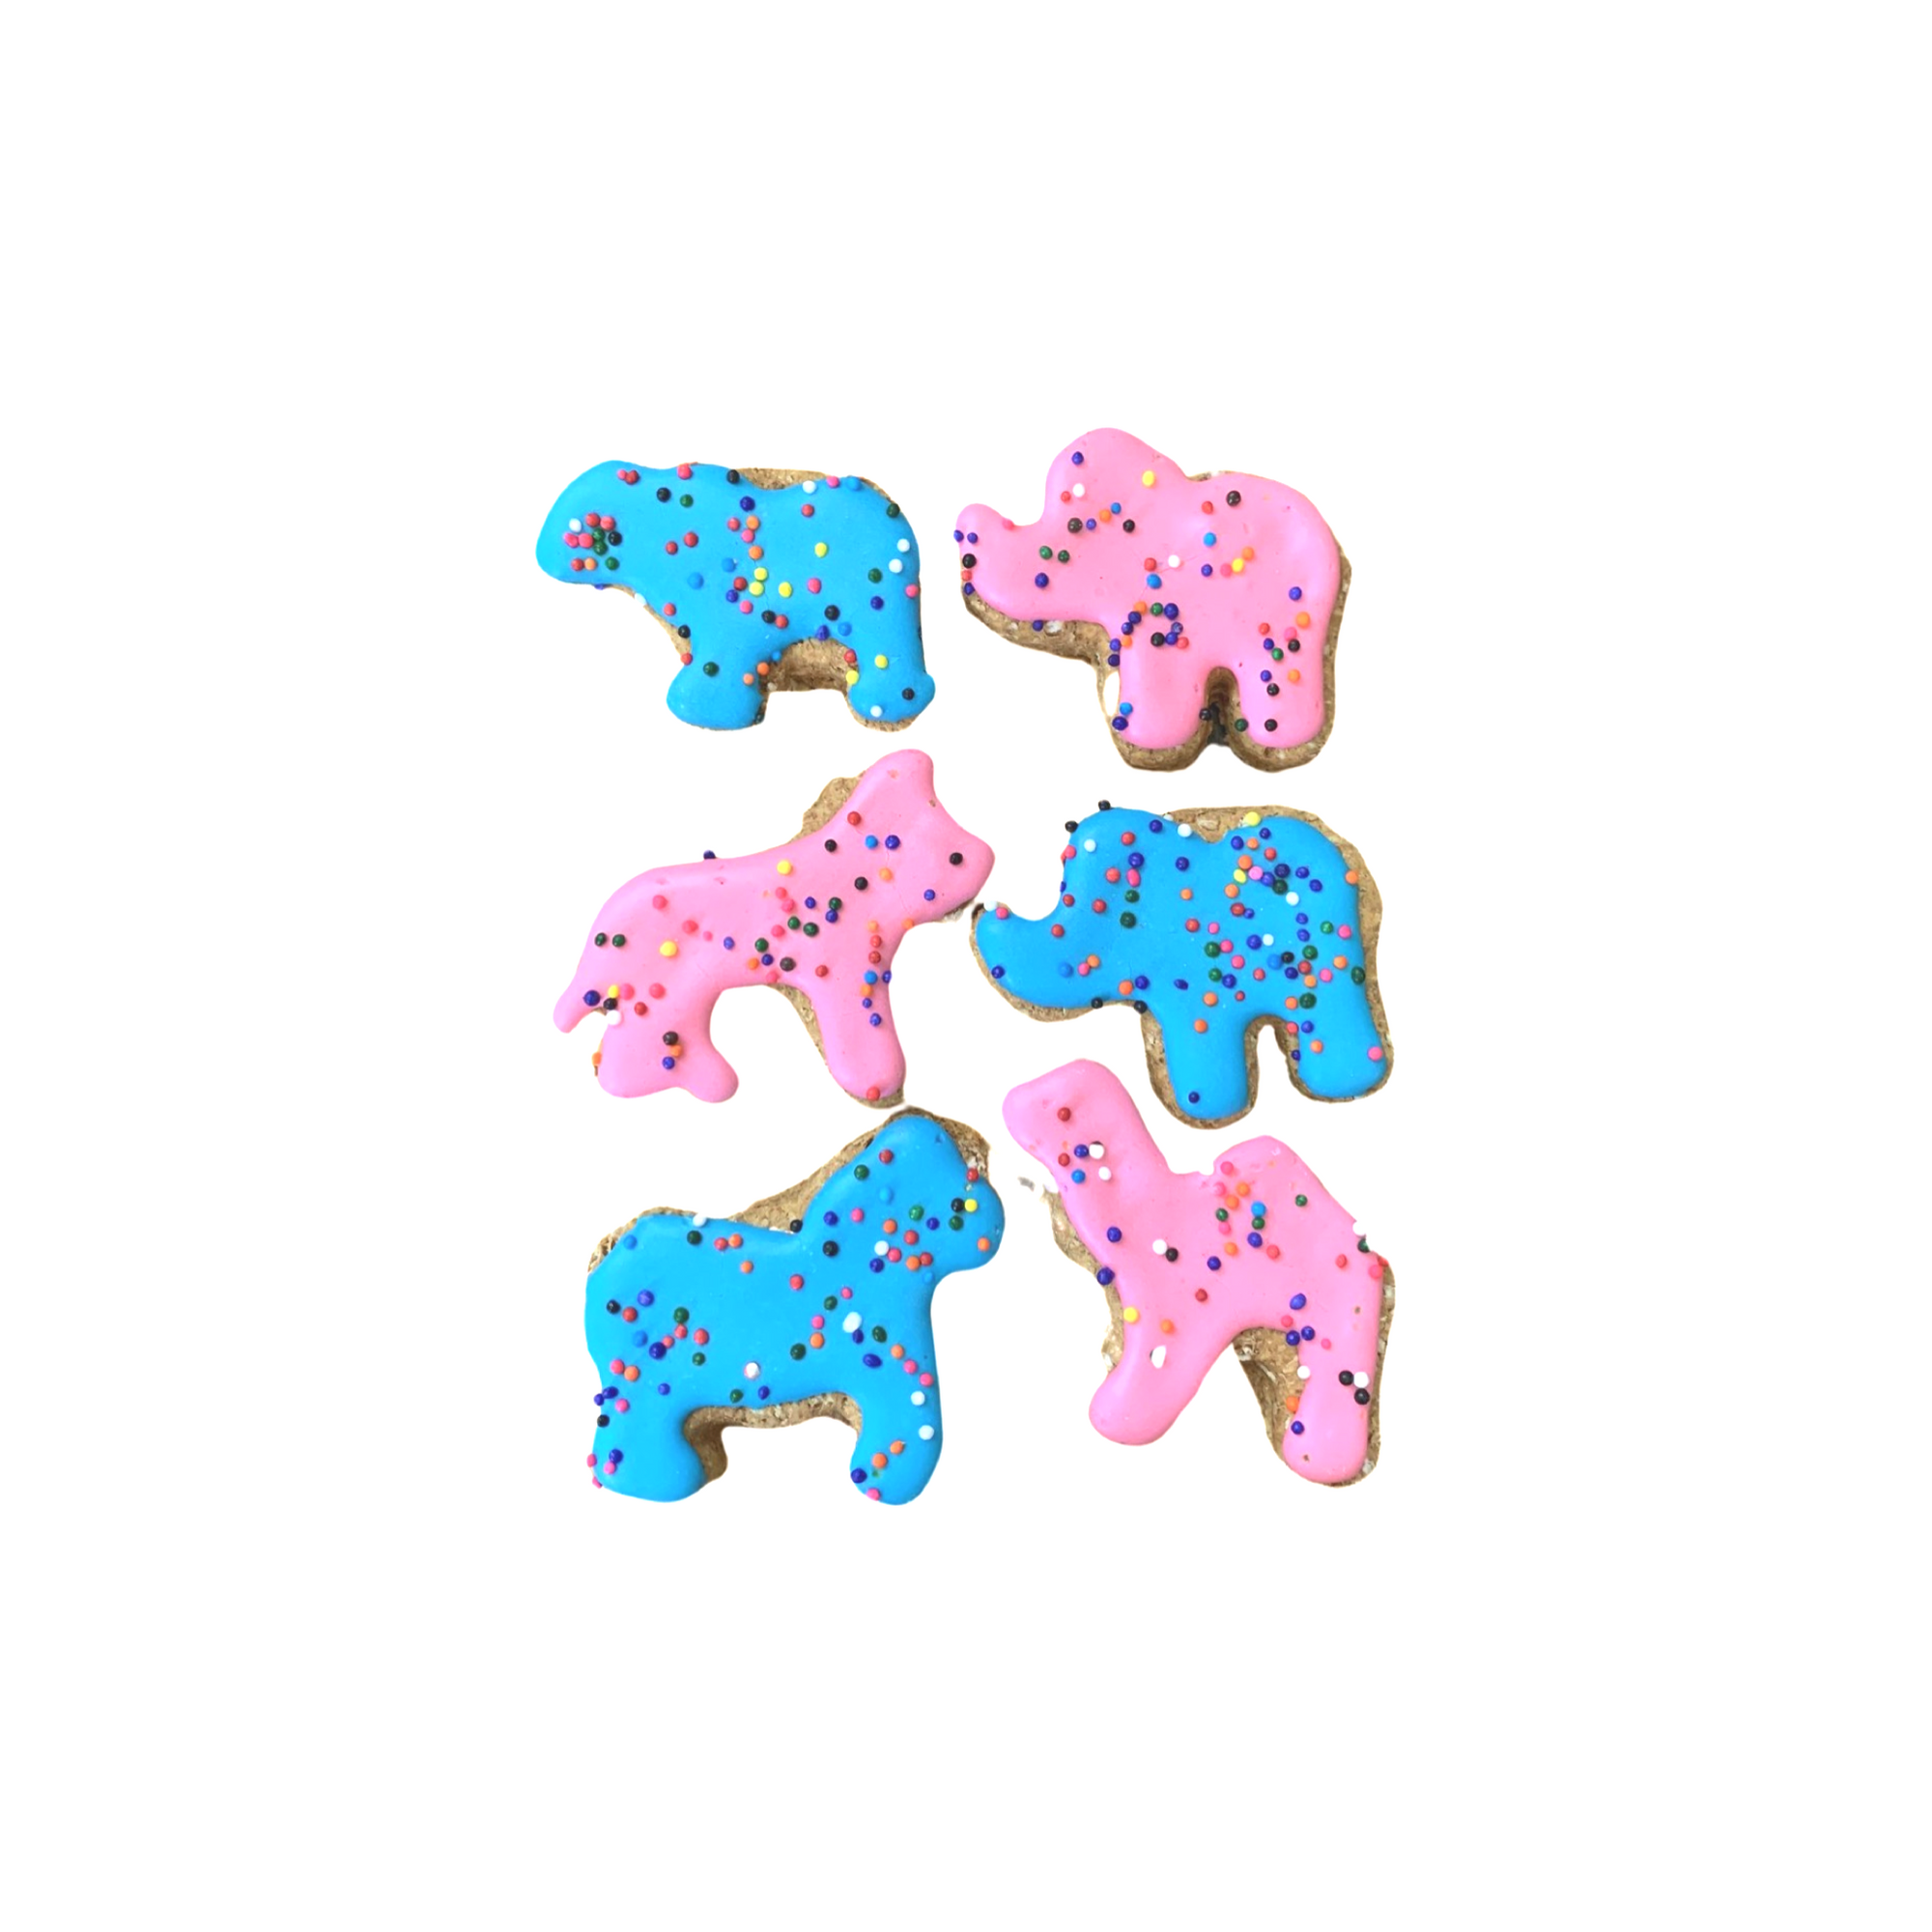 Animals - Large Decorated Doggy Cookies